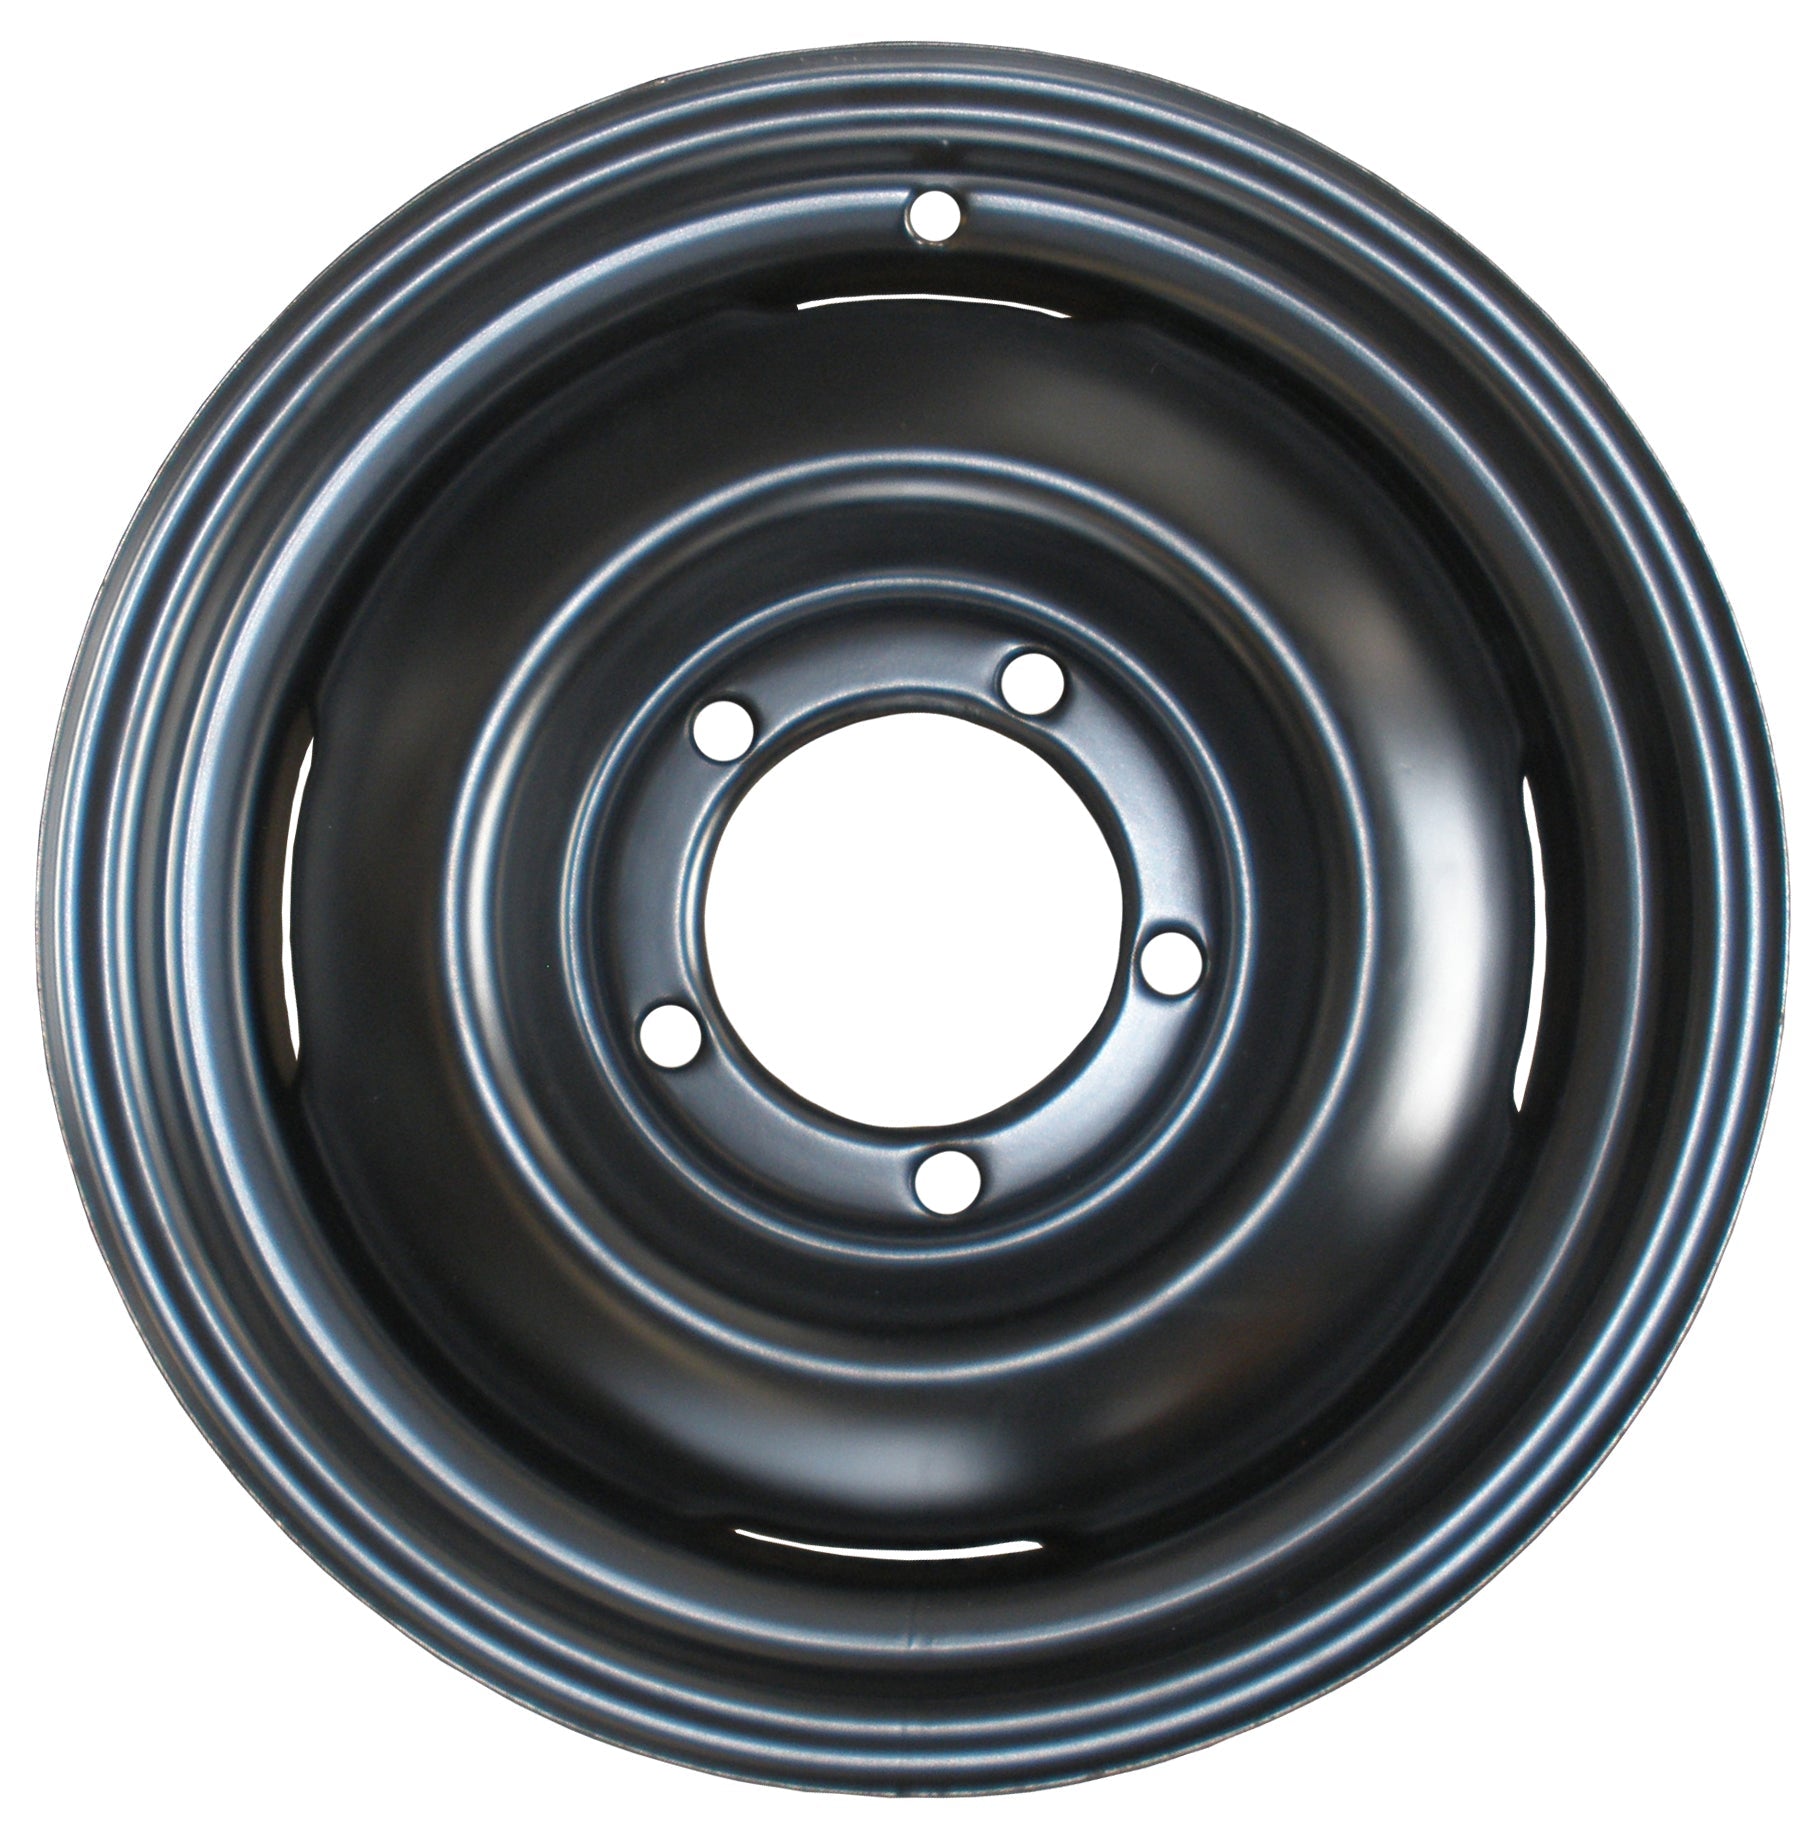 16" Civilian Steel Wheel, 1941-1986, Willys and Jeep - The JeepsterMan